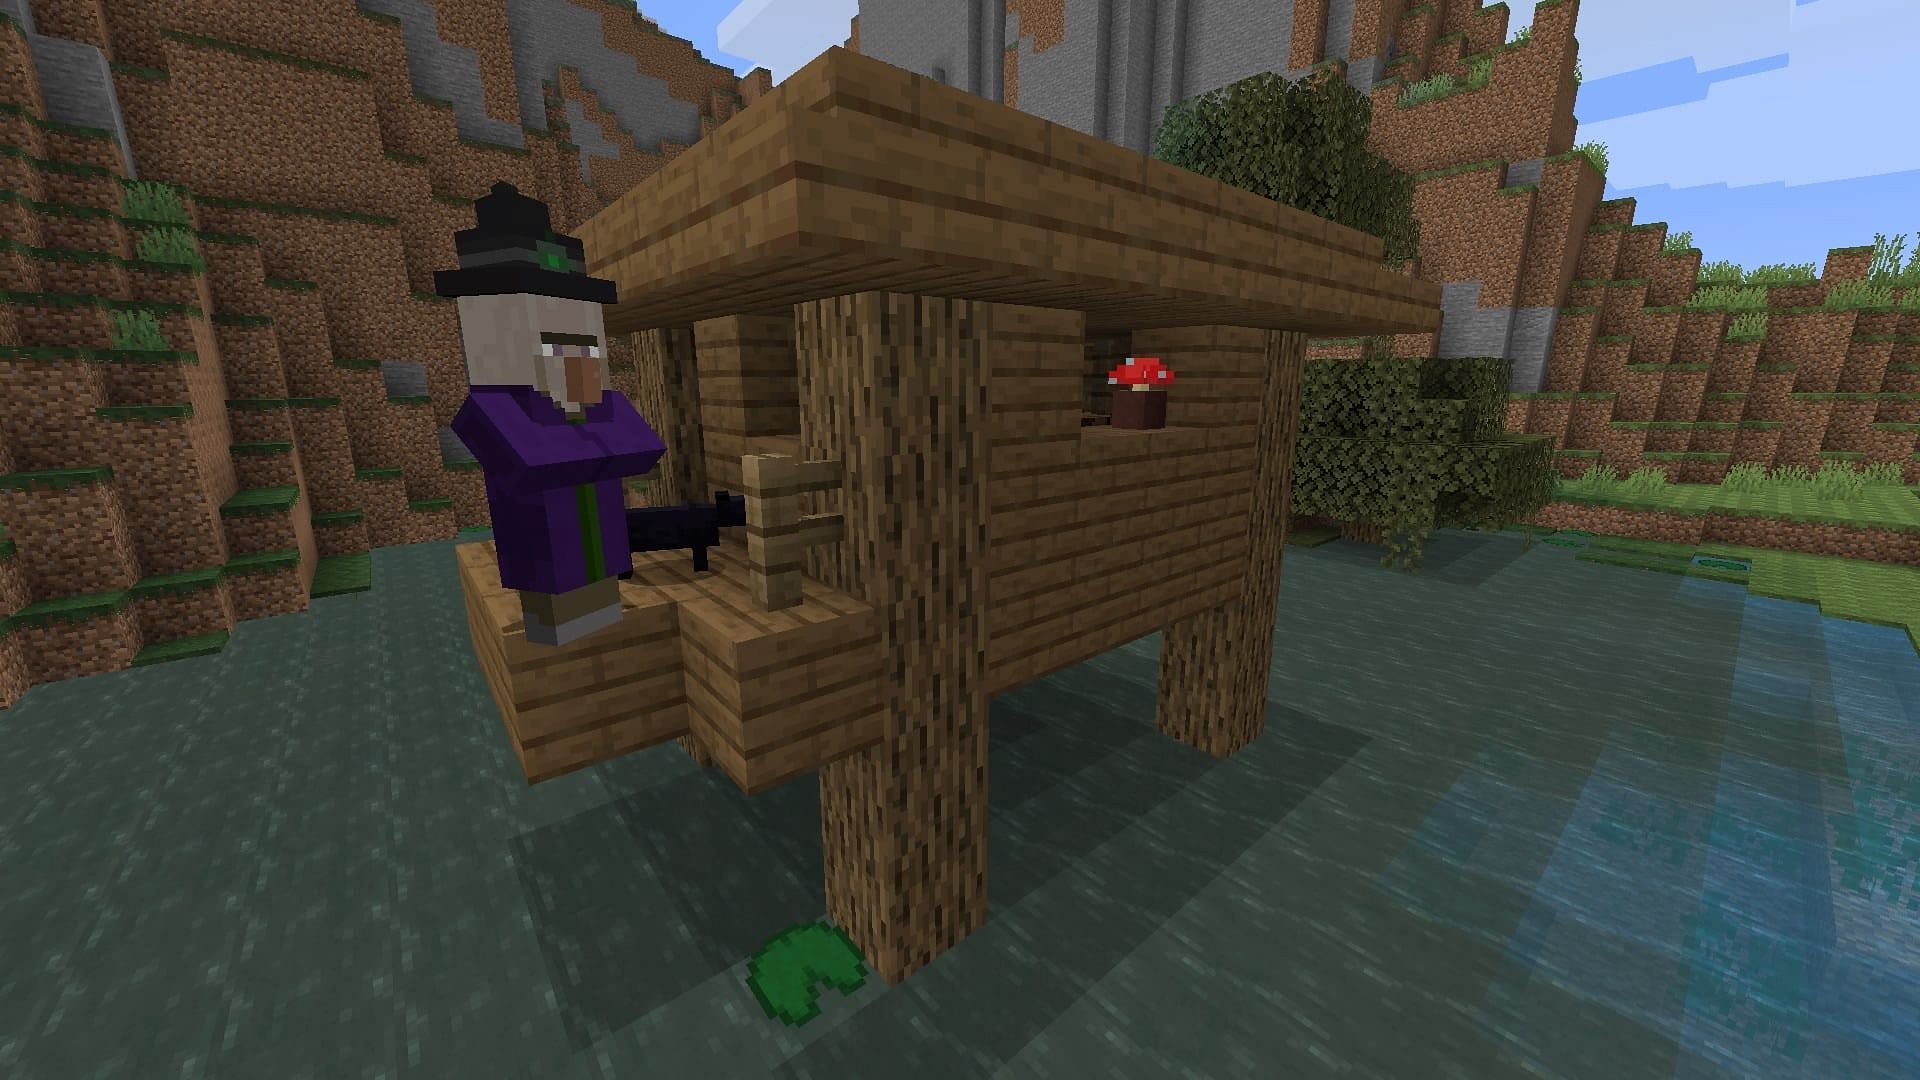 A witch rests on the porch of her hut (Image via Mojang)